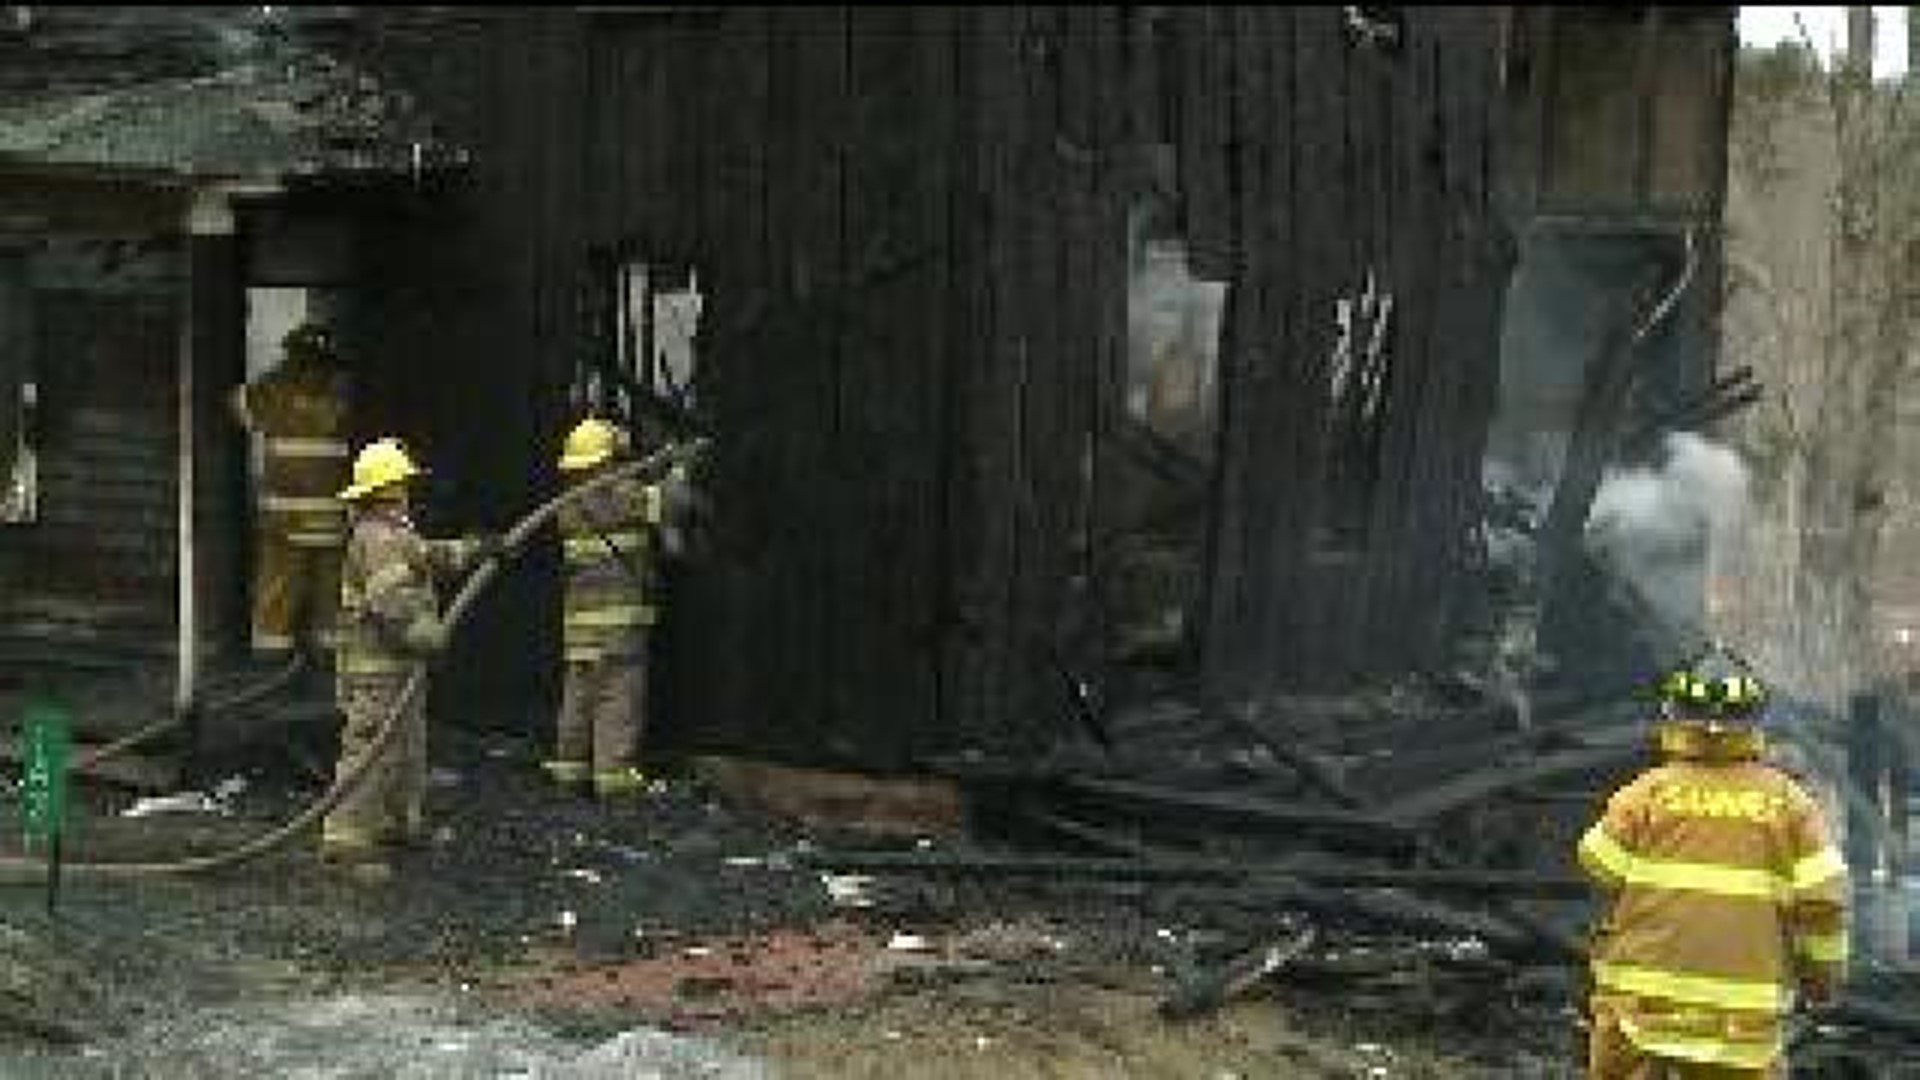 Fire Ruins Farmhouse Used To House Resort Workers